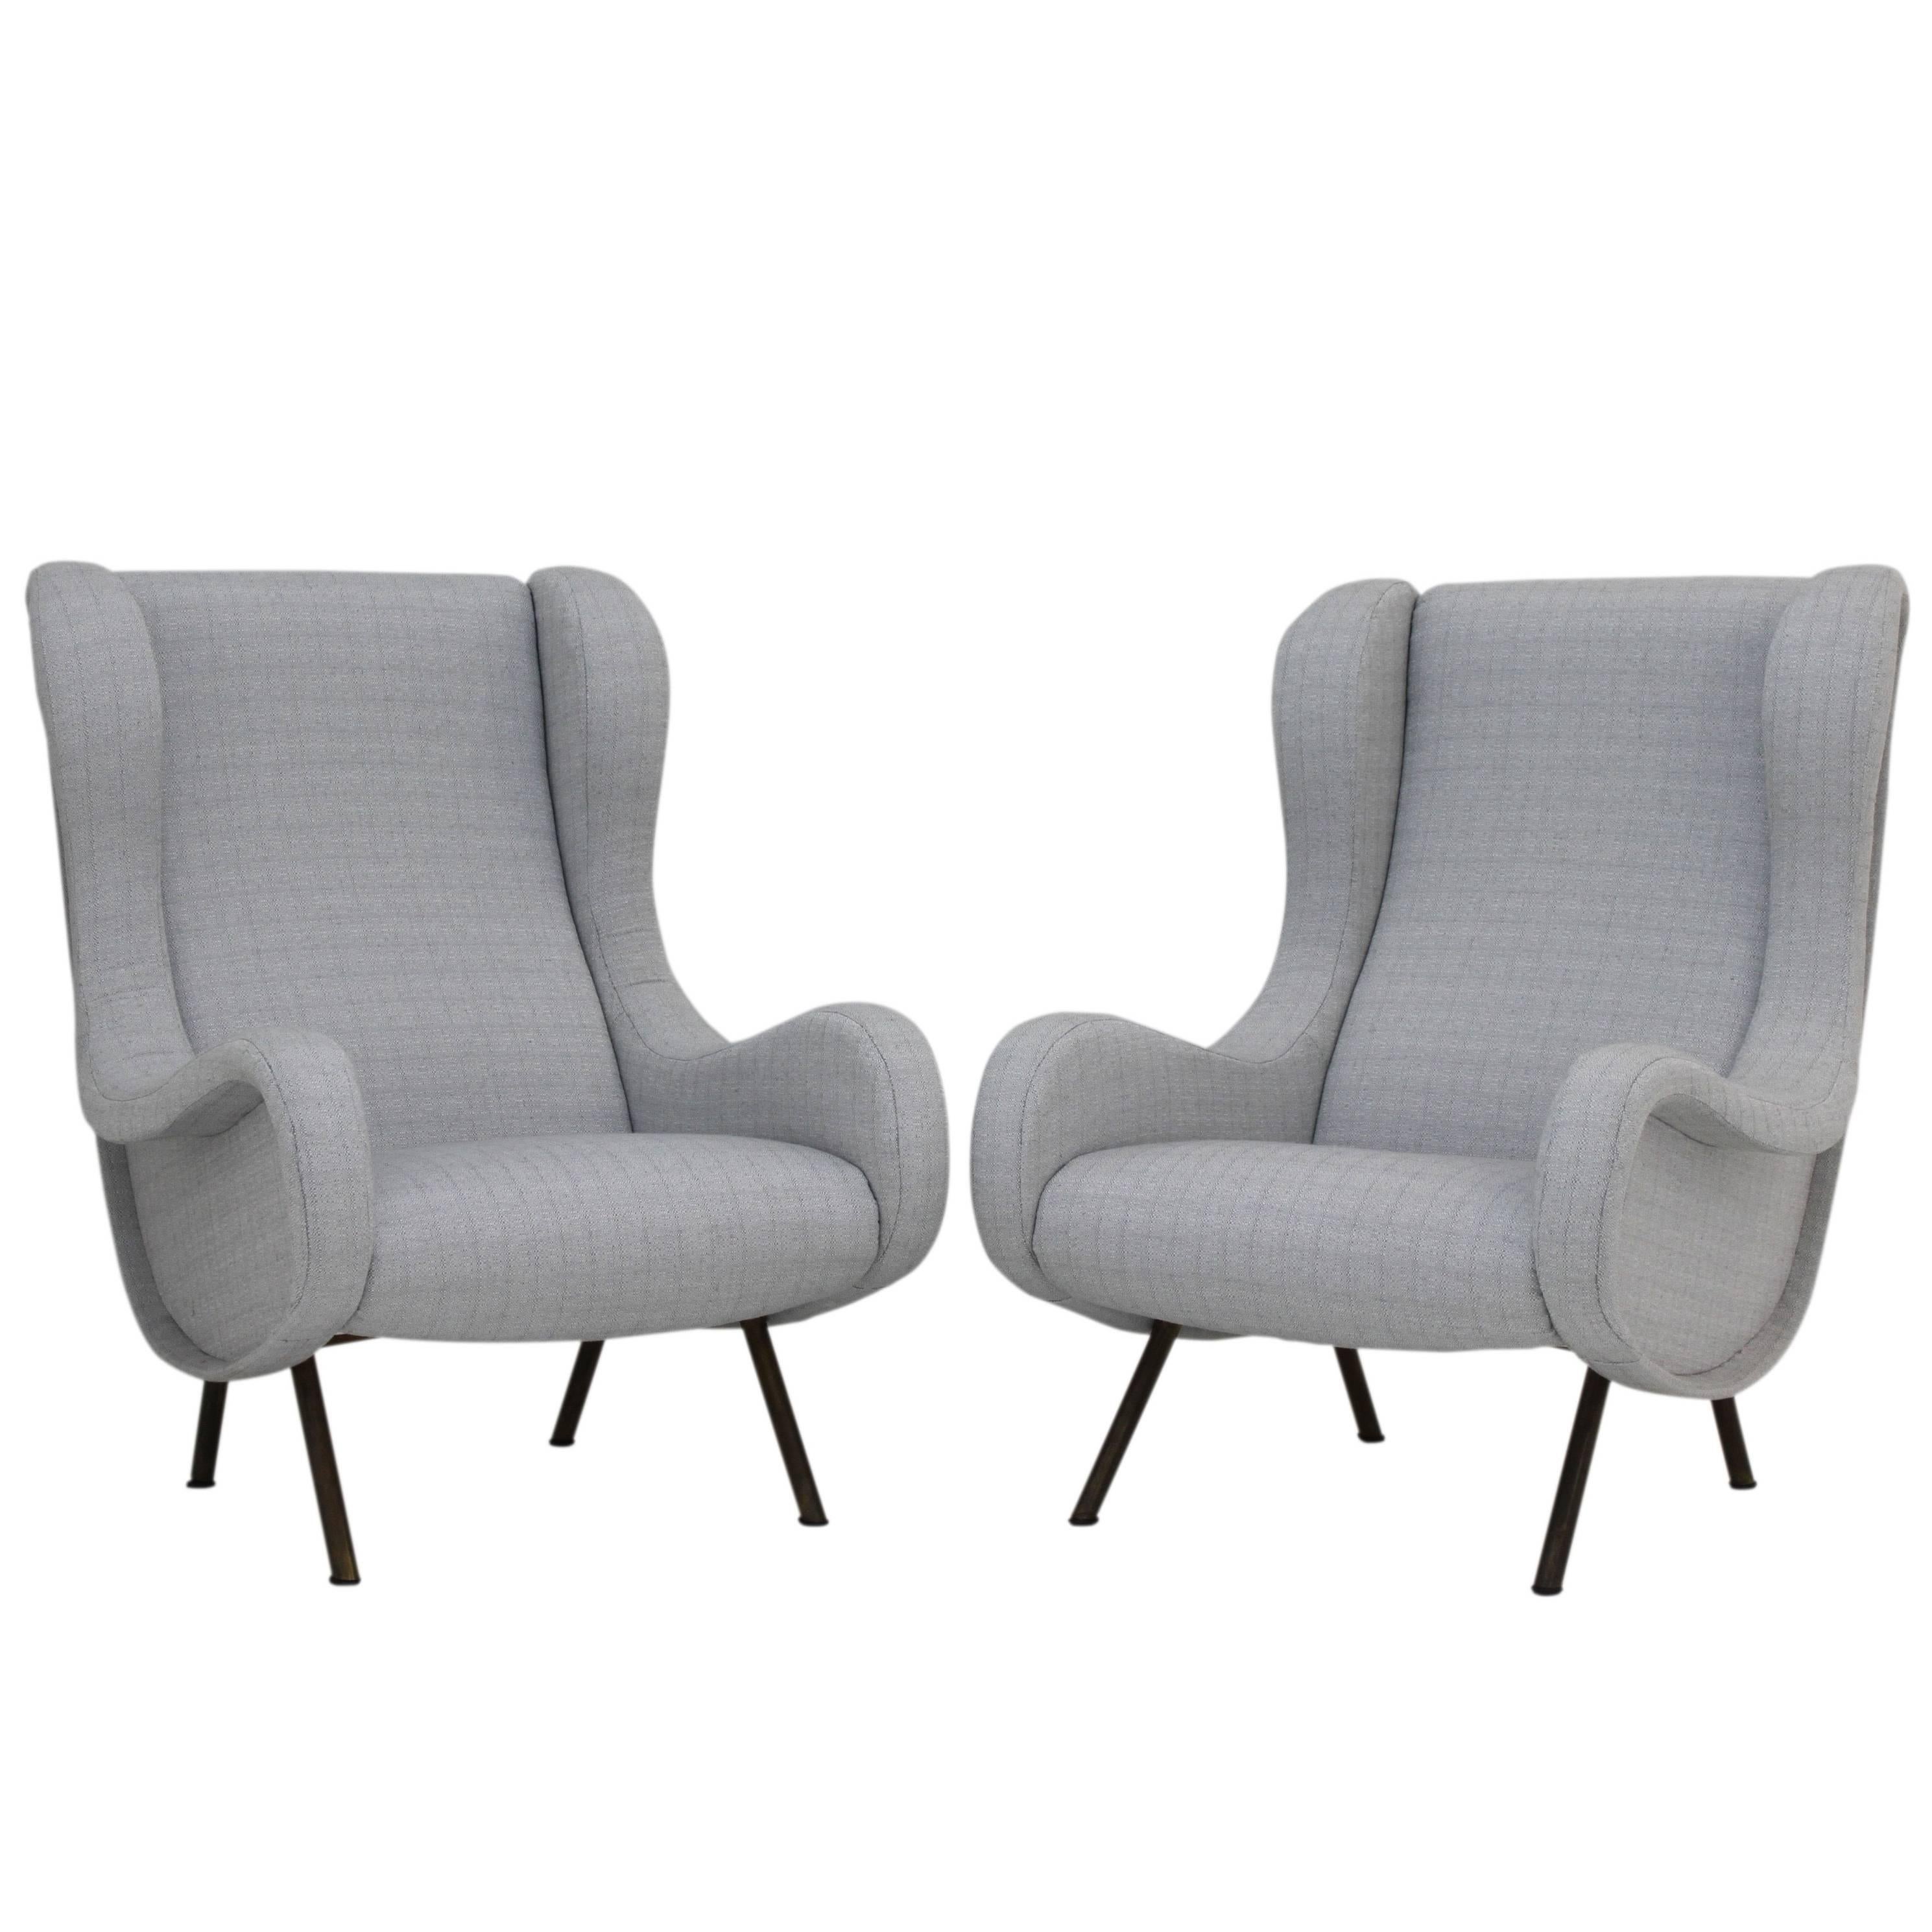 Marco Zanuso Pair of Armchairs For Sale